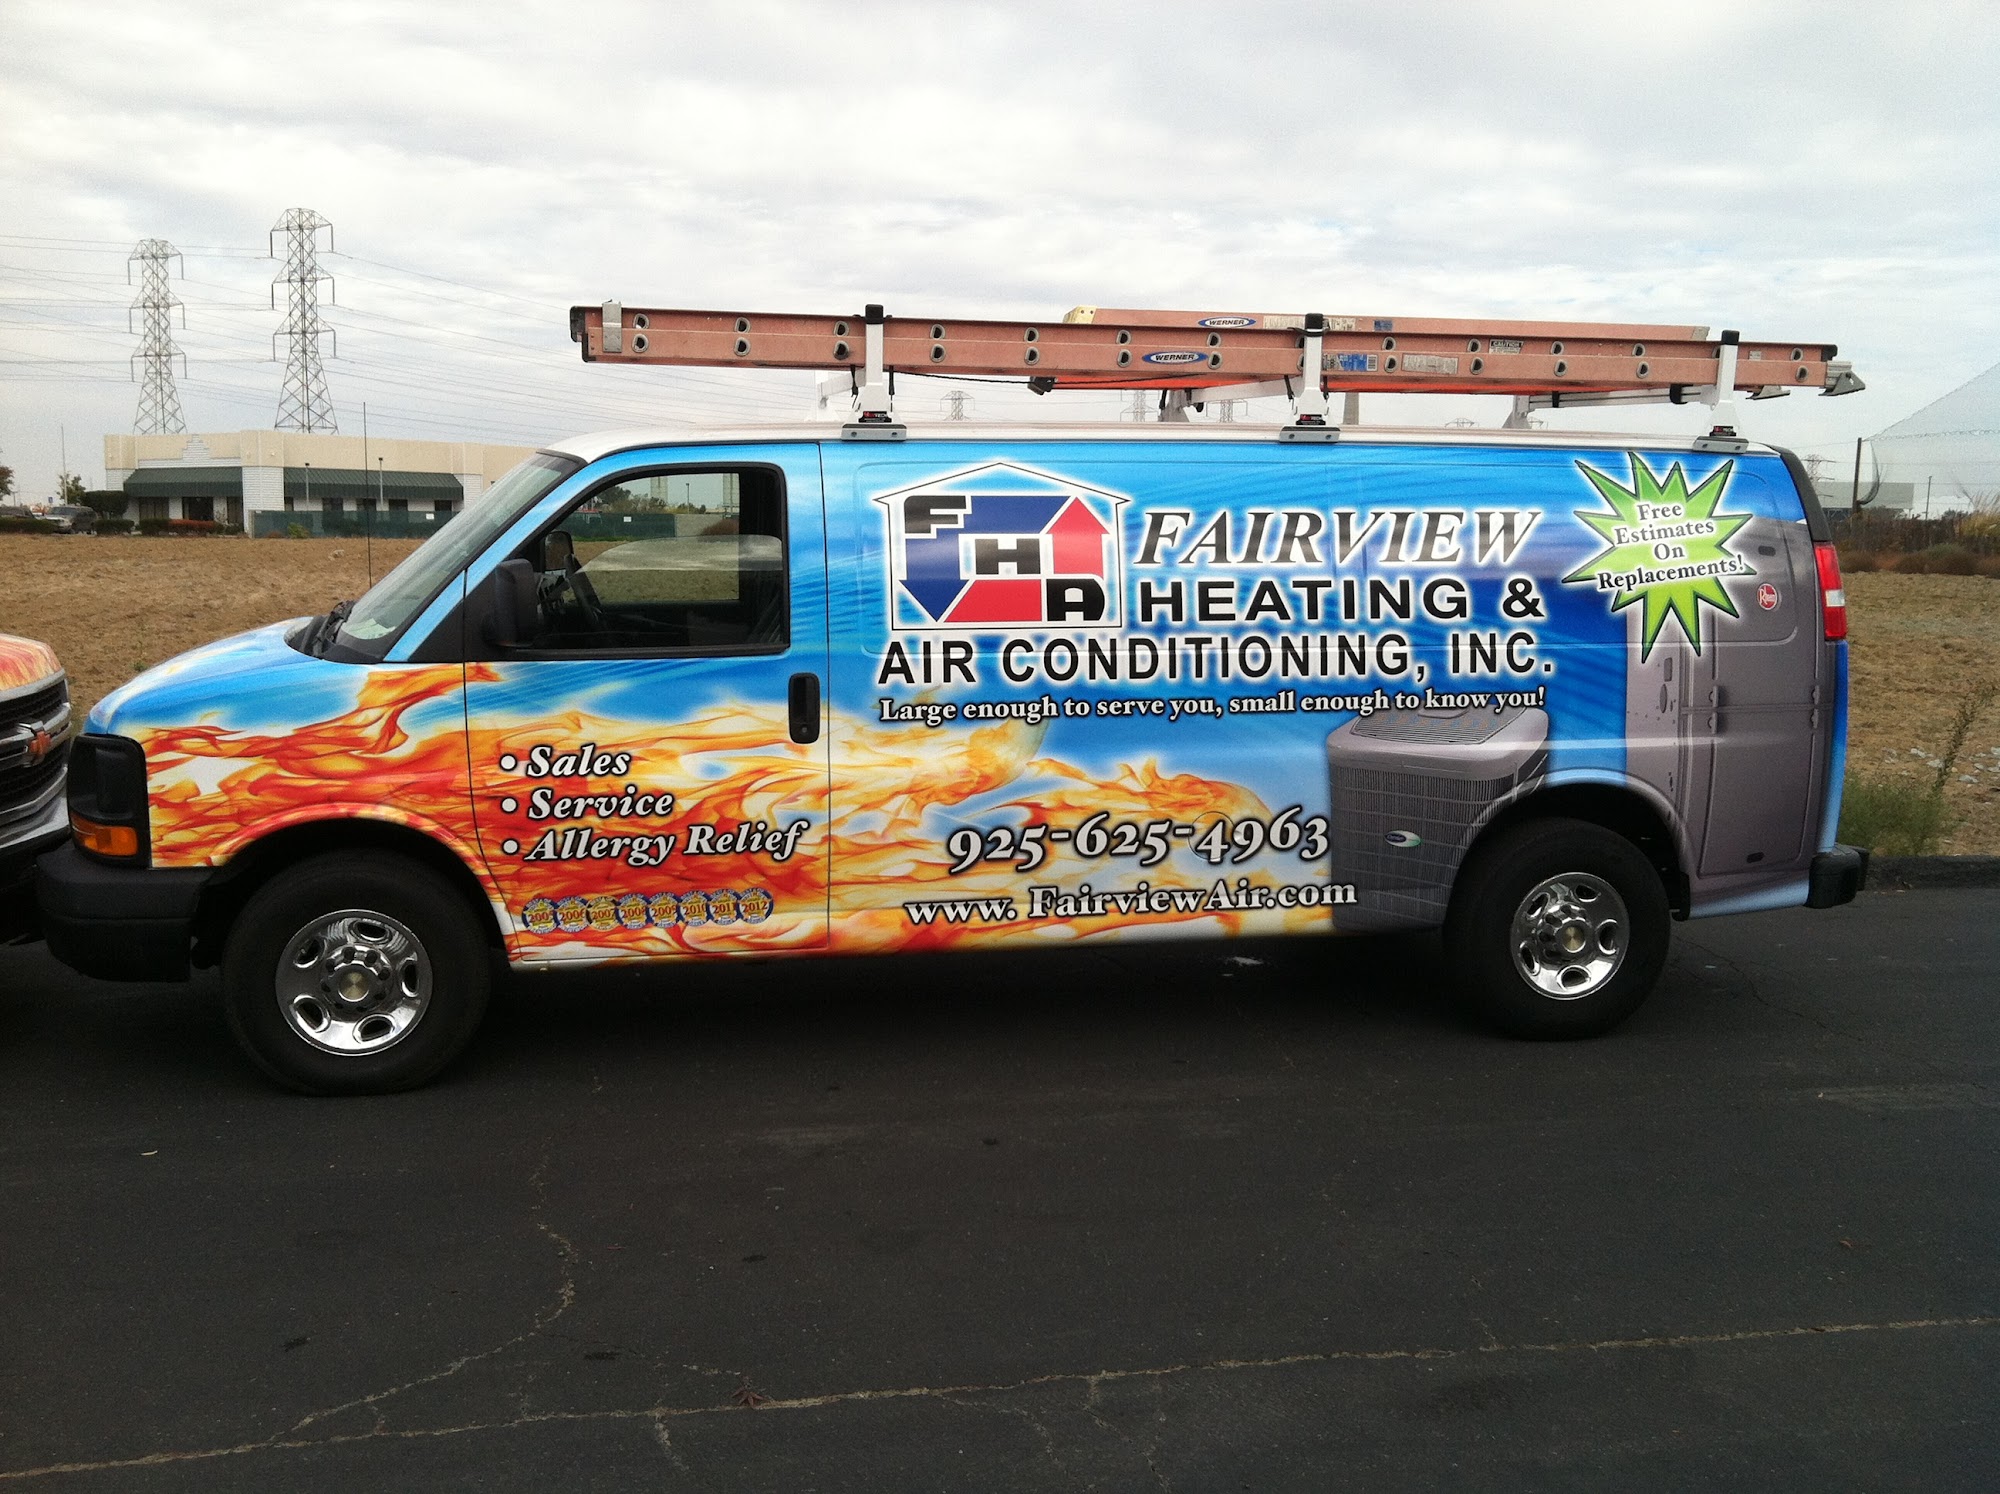 Fairview Heating & Air Conditioning Inc.